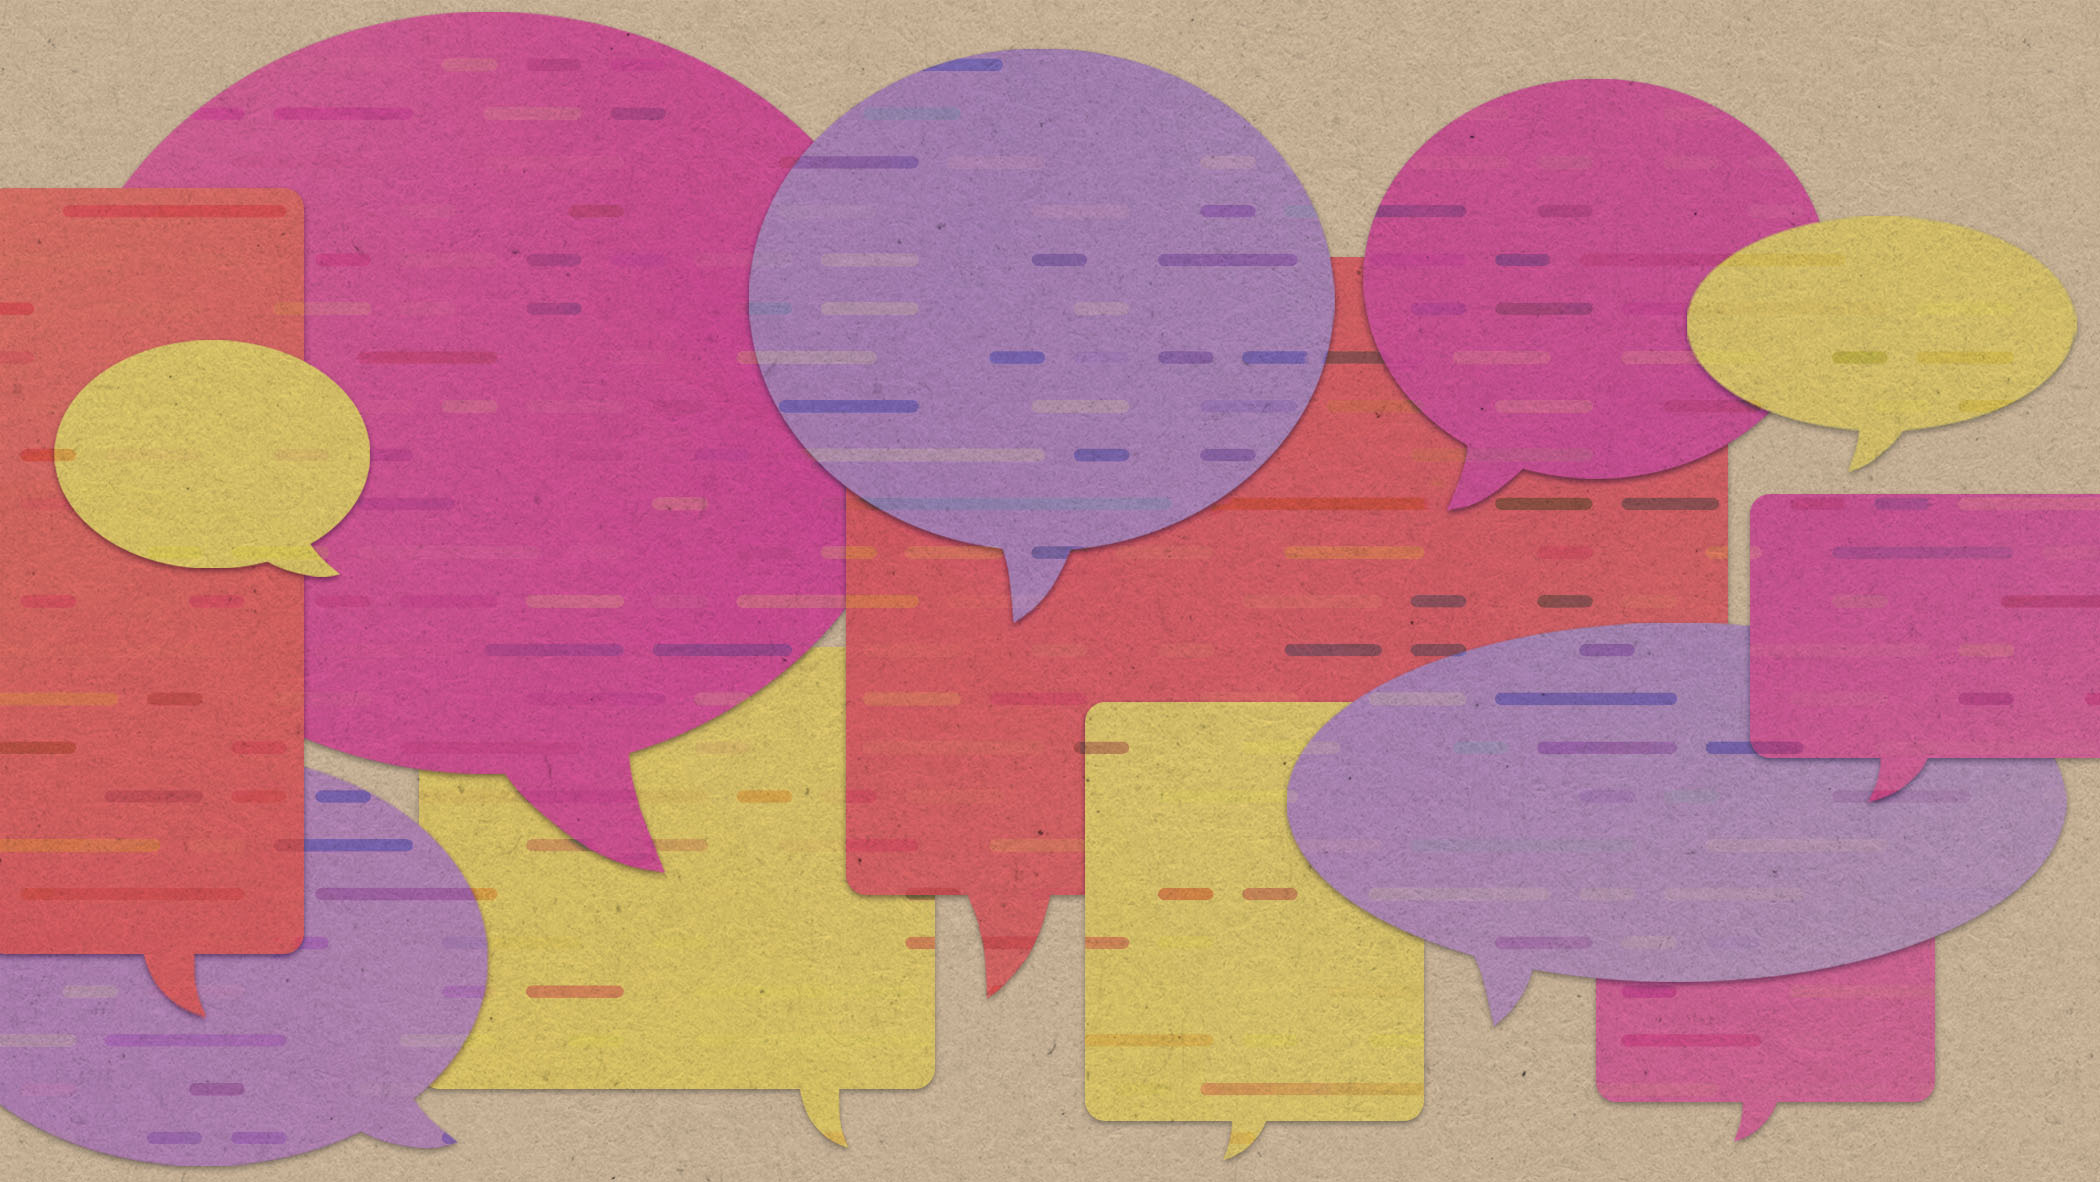 A photo illustration showing speech bubbles full of data.